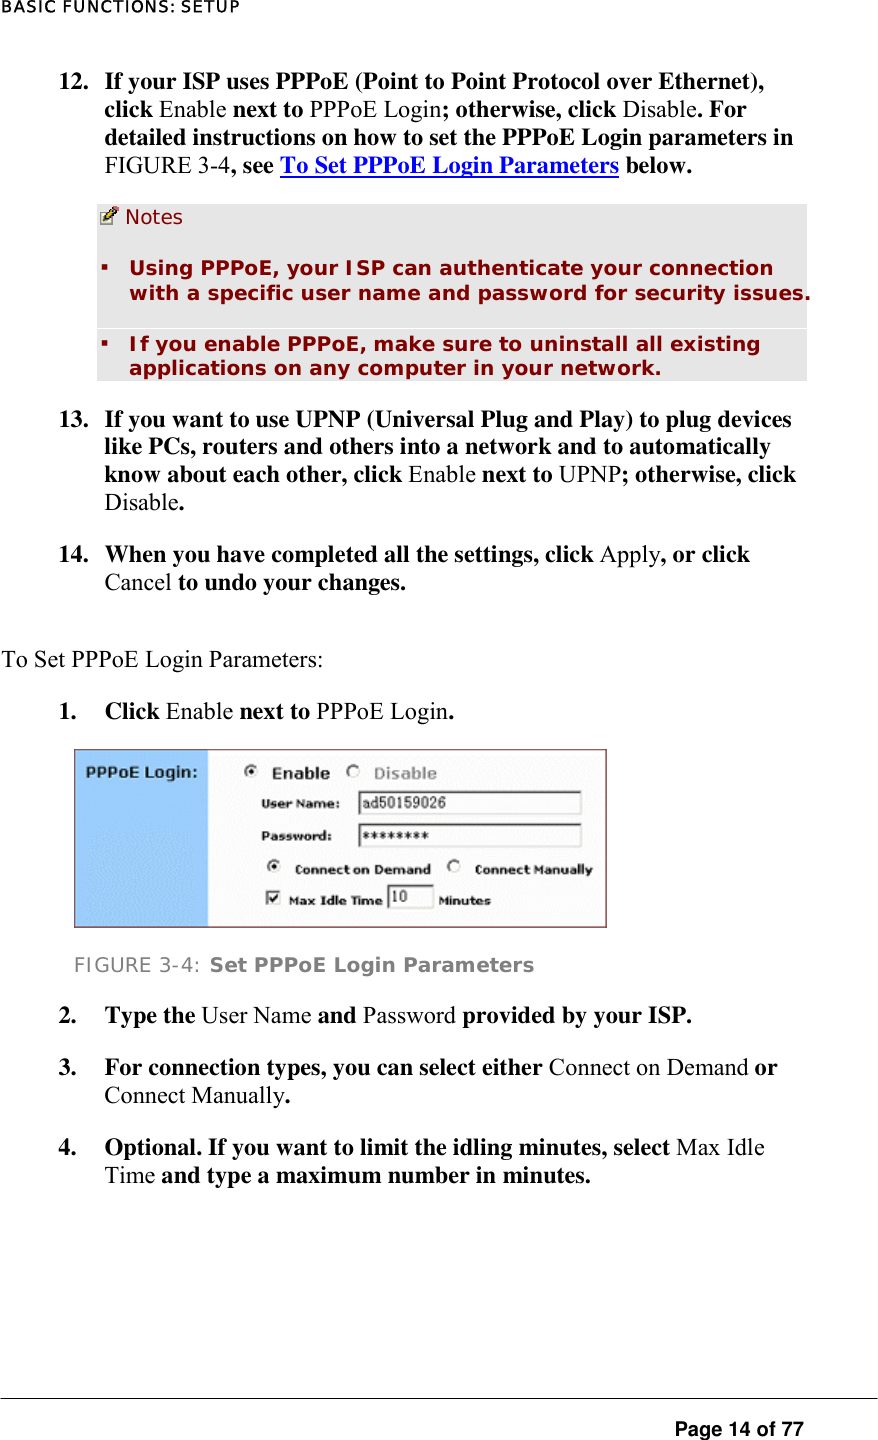 BASIC FUNCTIONS: SETUP  Page 14 of 77 12.  If your ISP uses PPPoE (Point to Point Protocol over Ethernet), click Enable next to PPPoE Login; otherwise, click Disable. For detailed instructions on how to set the PPPoE Login parameters in FIGURE 3-4, see To Set PPPoE Login Parameters below.   Notes  ▪ Using PPPoE, your ISP can authenticate your connection with a specific user name and password for security issues.  ▪ If you enable PPPoE, make sure to uninstall all existing applications on any computer in your network.  13.  If you want to use UPNP (Universal Plug and Play) to plug devices like PCs, routers and others into a network and to automatically know about each other, click Enable next to UPNP; otherwise, click Disable.  14.  When you have completed all the settings, click Apply, or click Cancel to undo your changes.  To Set PPPoE Login Parameters:  1. Click Enable next to PPPoE Login.   FIGURE 3-4: Set PPPoE Login Parameters 2. Type the User Name and Password provided by your ISP.   3.  For connection types, you can select either Connect on Demand or Connect Manually.  4.  Optional. If you want to limit the idling minutes, select Max Idle Time and type a maximum number in minutes. 